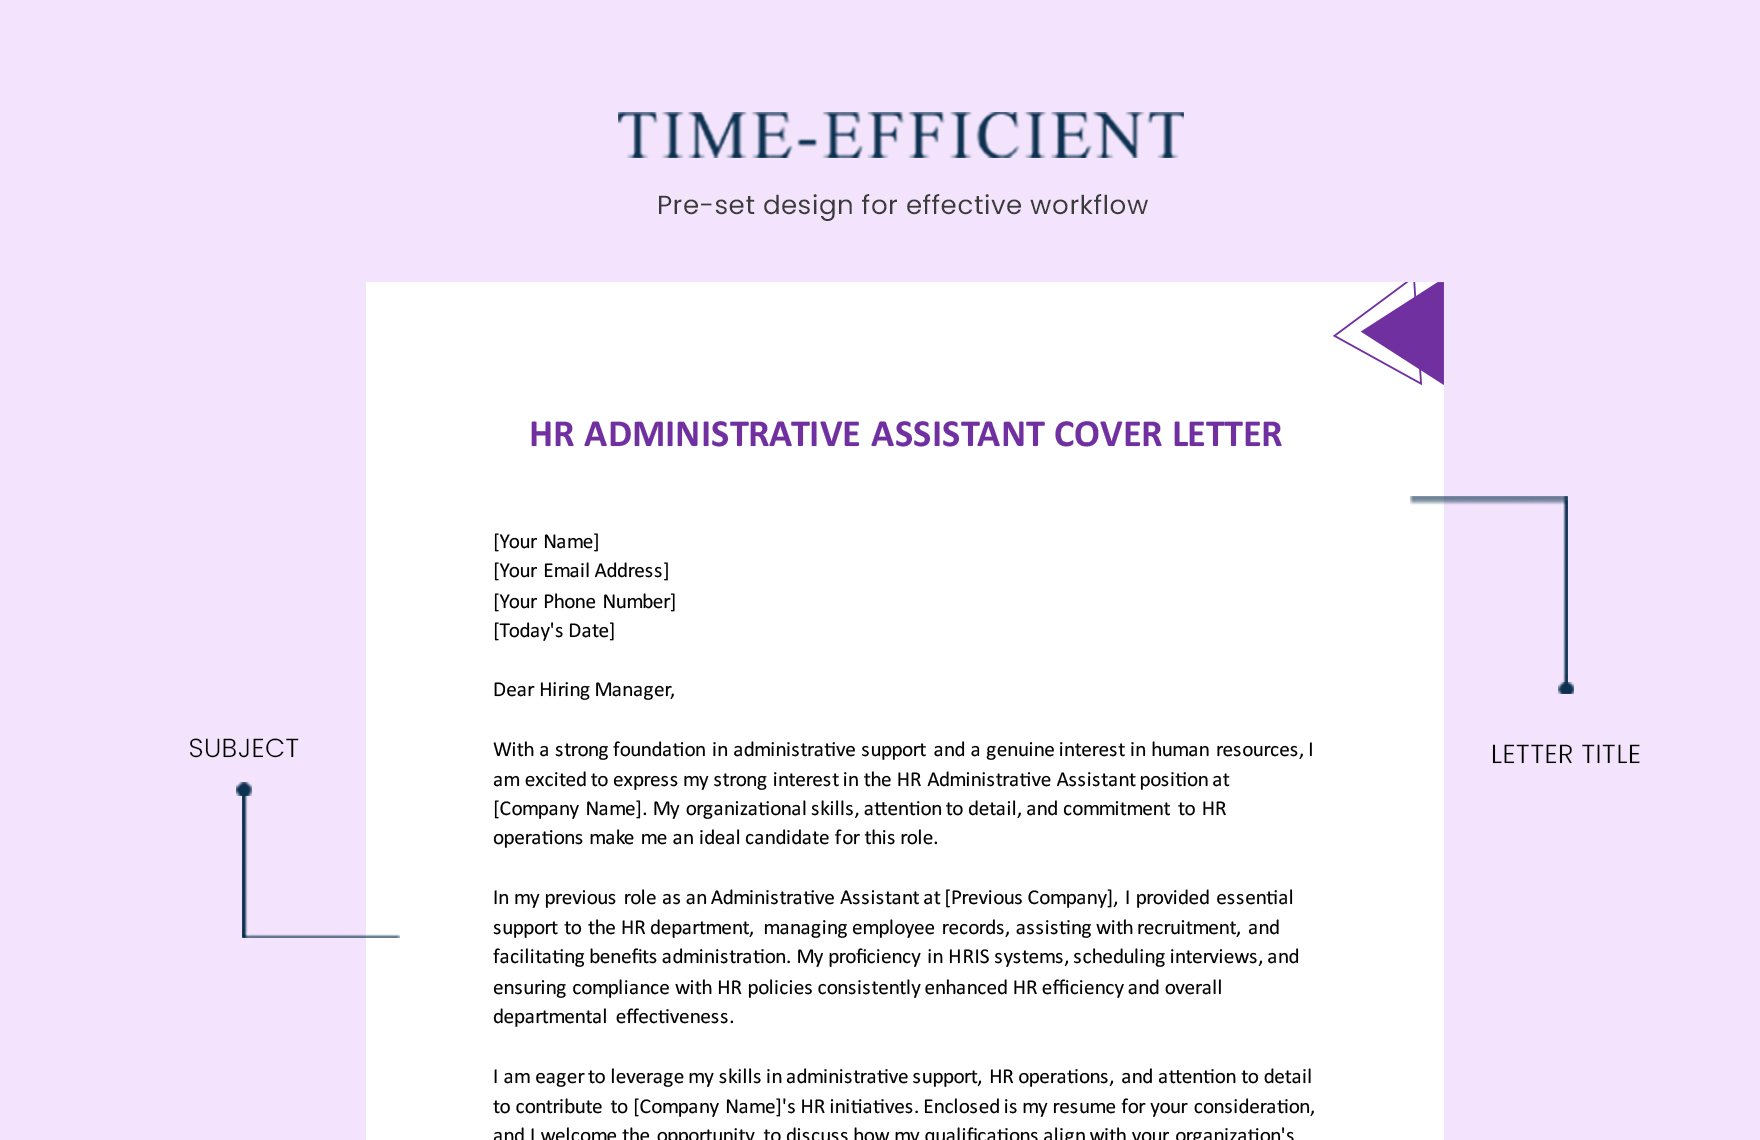 HR Administrative Assistant Cover Letter